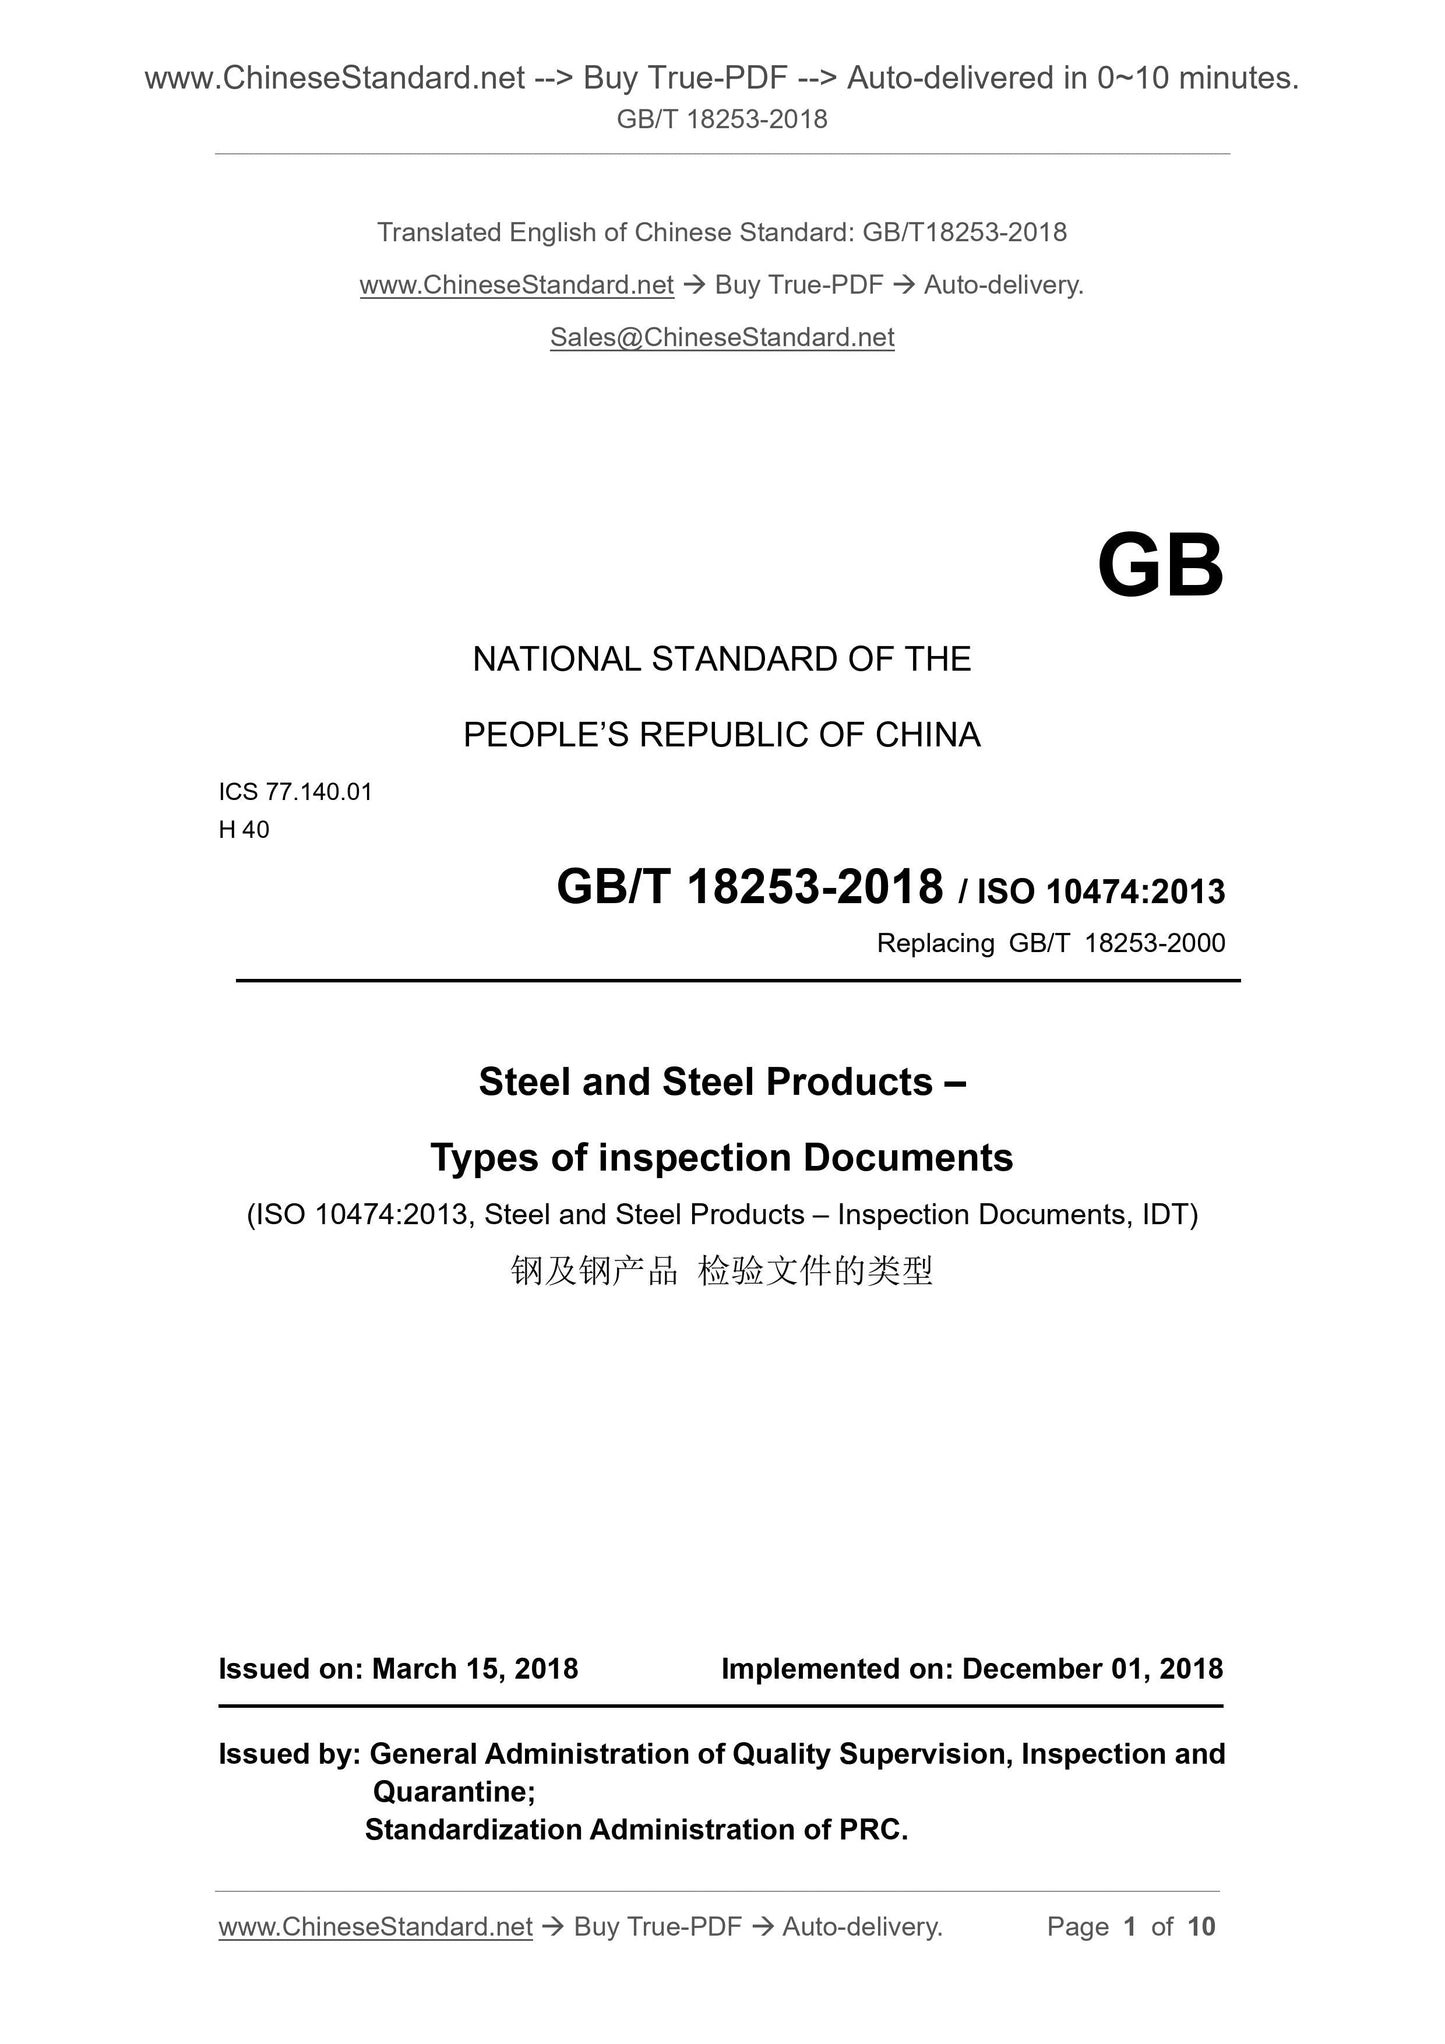 GB/T 18253-2018 Page 1